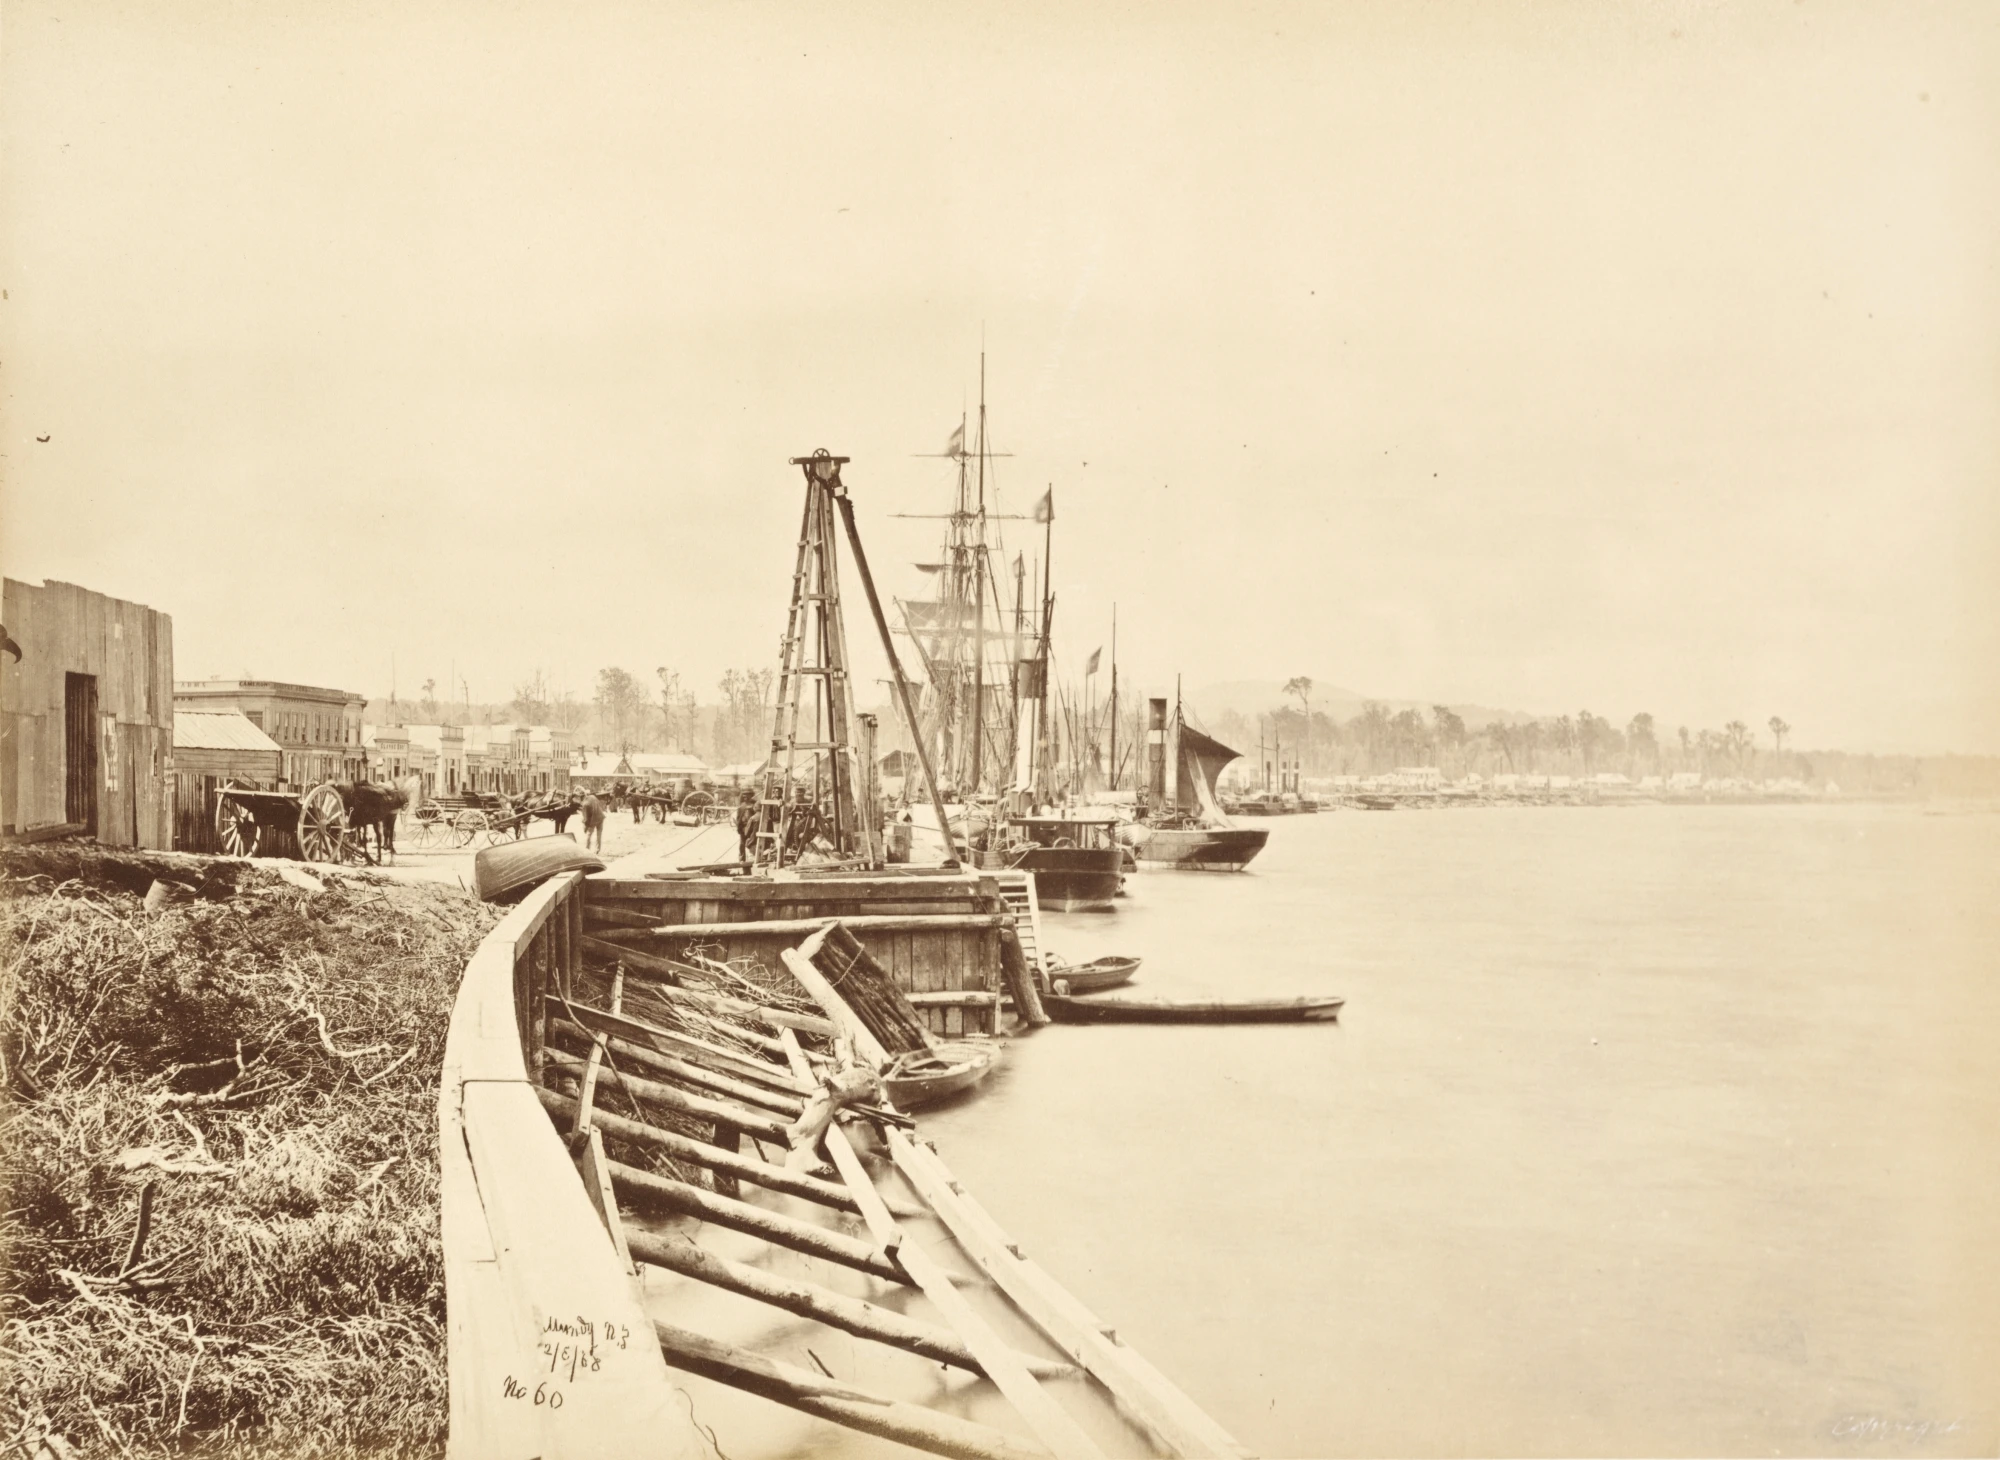 A busy wharf with ships and rowboats lined up and a bustling town at the water's edge. 